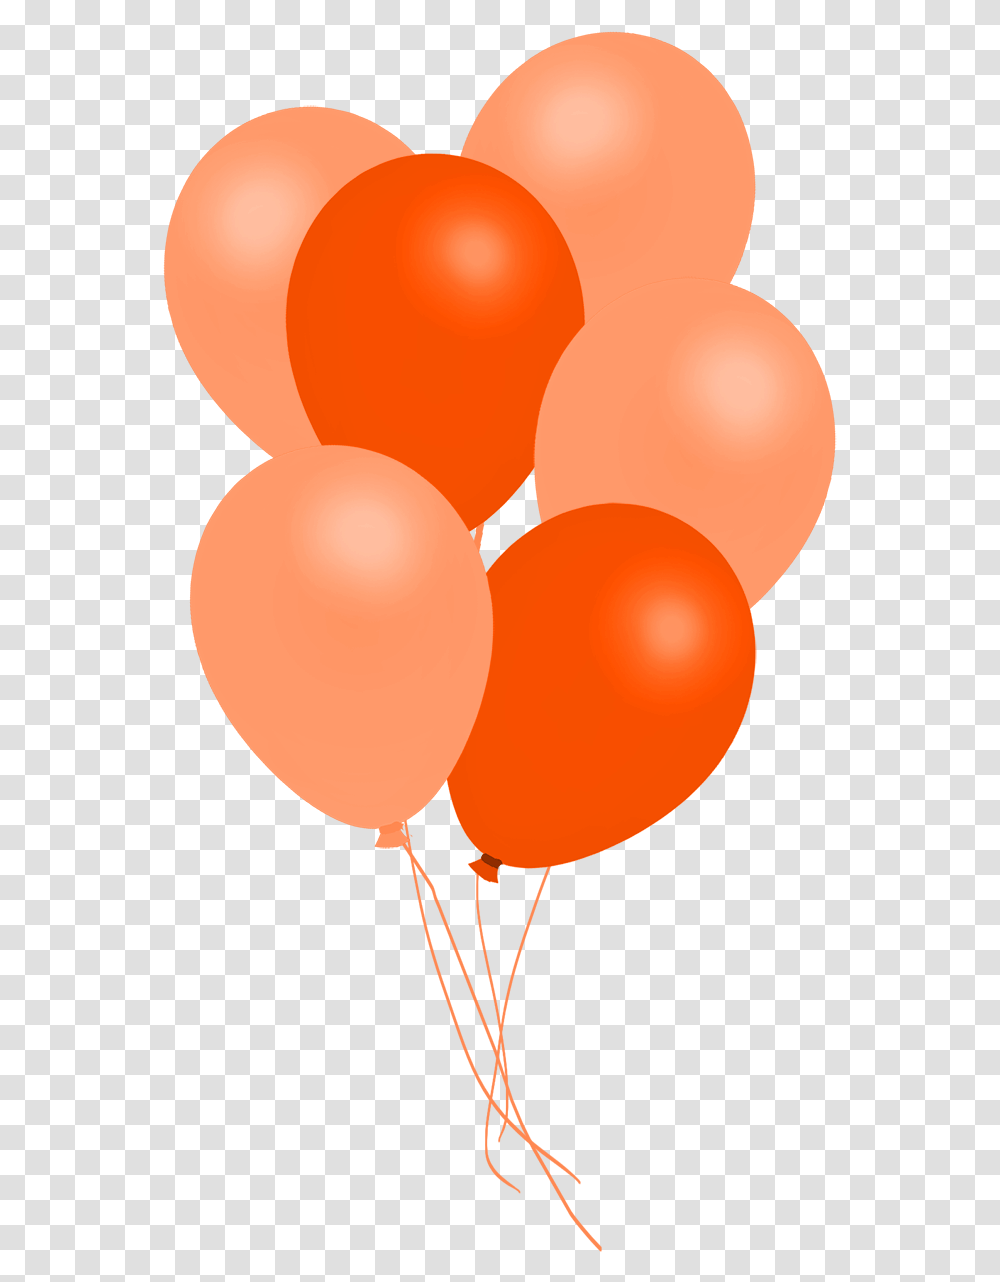 Orange Balloons Clipart Red Balloon Transparent Png